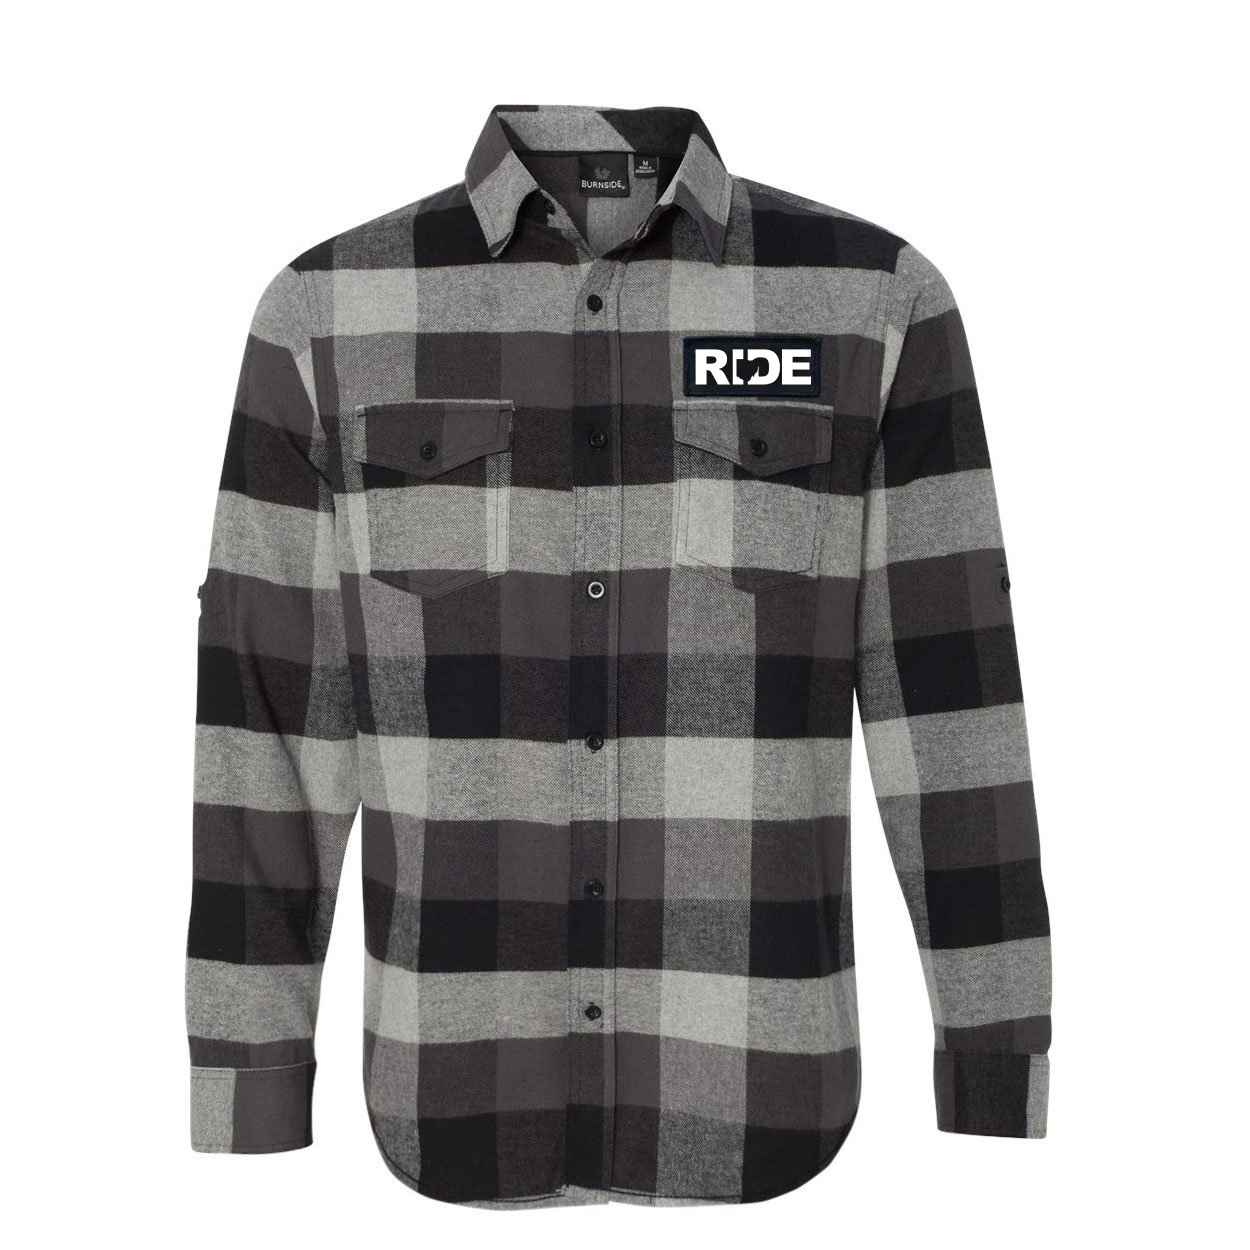 Ride Ohio Classic Unisex Long Sleeve Woven Patch Flannel Shirt Black/Gray (White Logo)